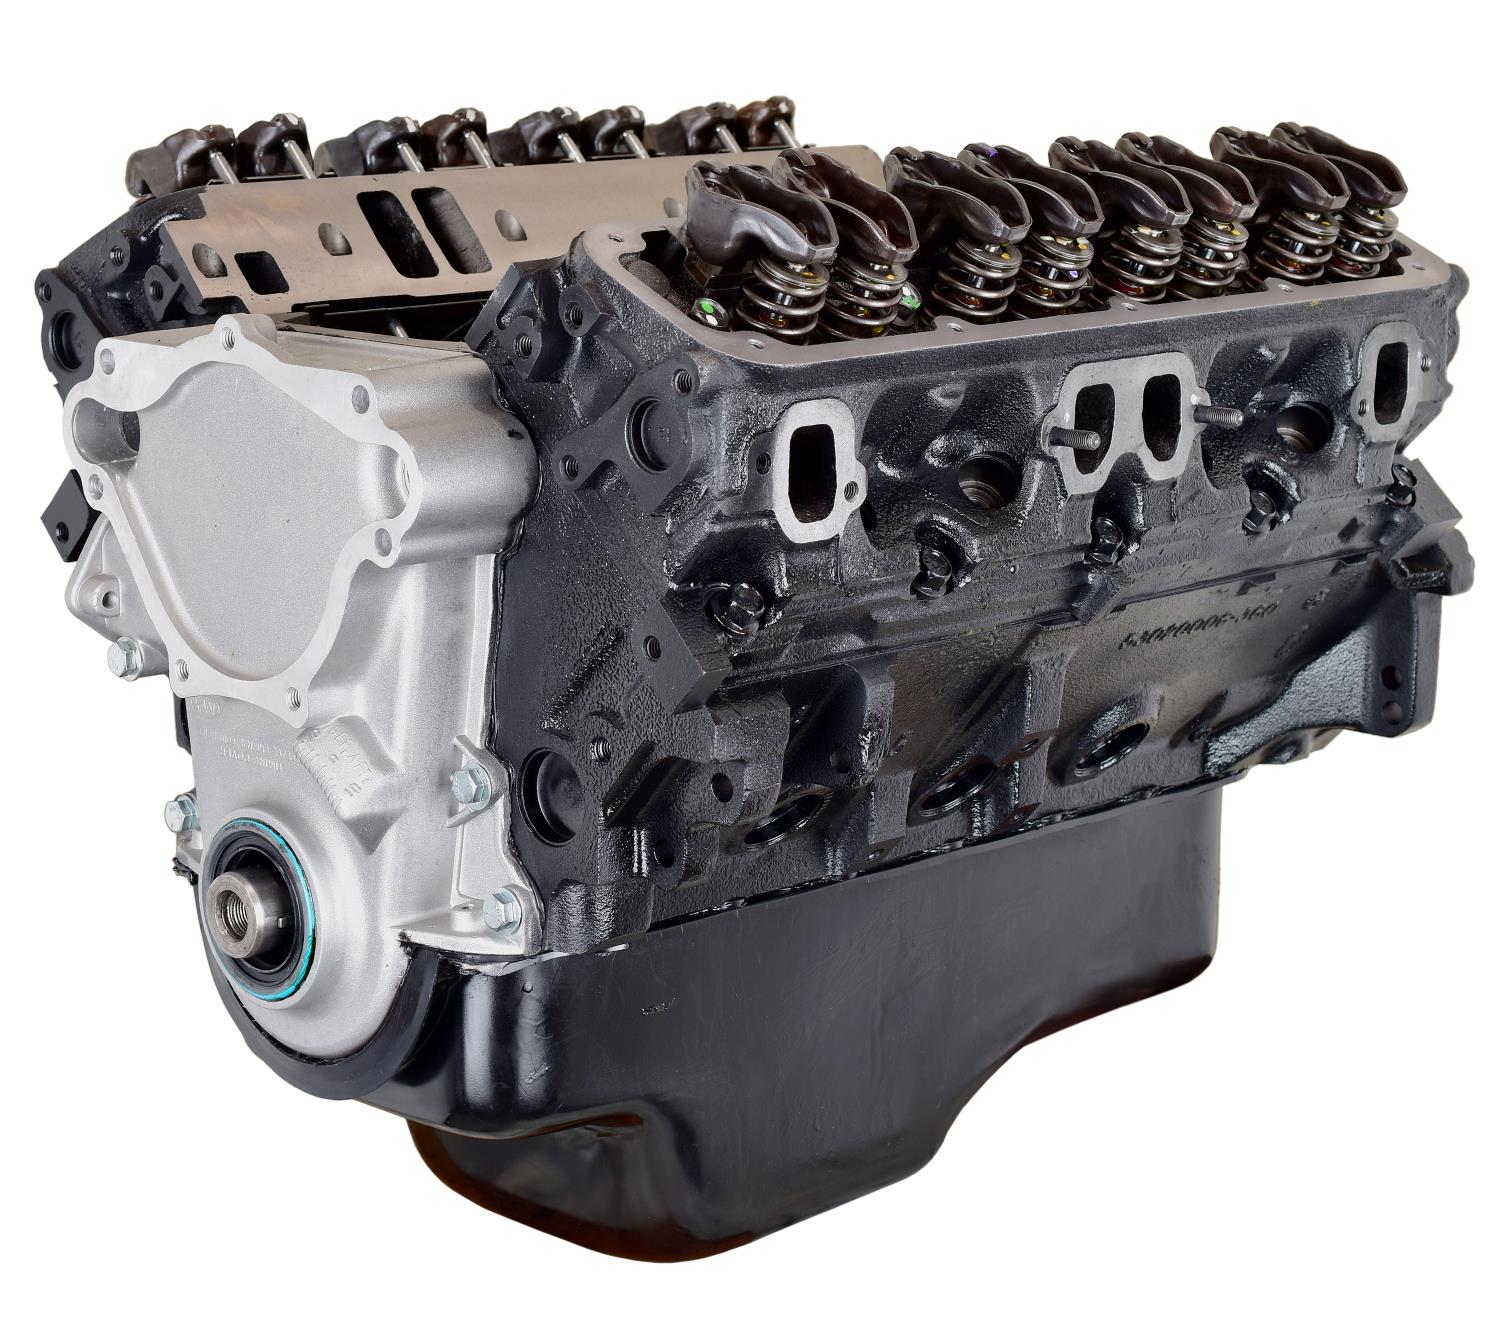 3601 Chrysler Magnum 360 ci Performance Crate Engine [310 HP/ 400 FT.-LBS.]